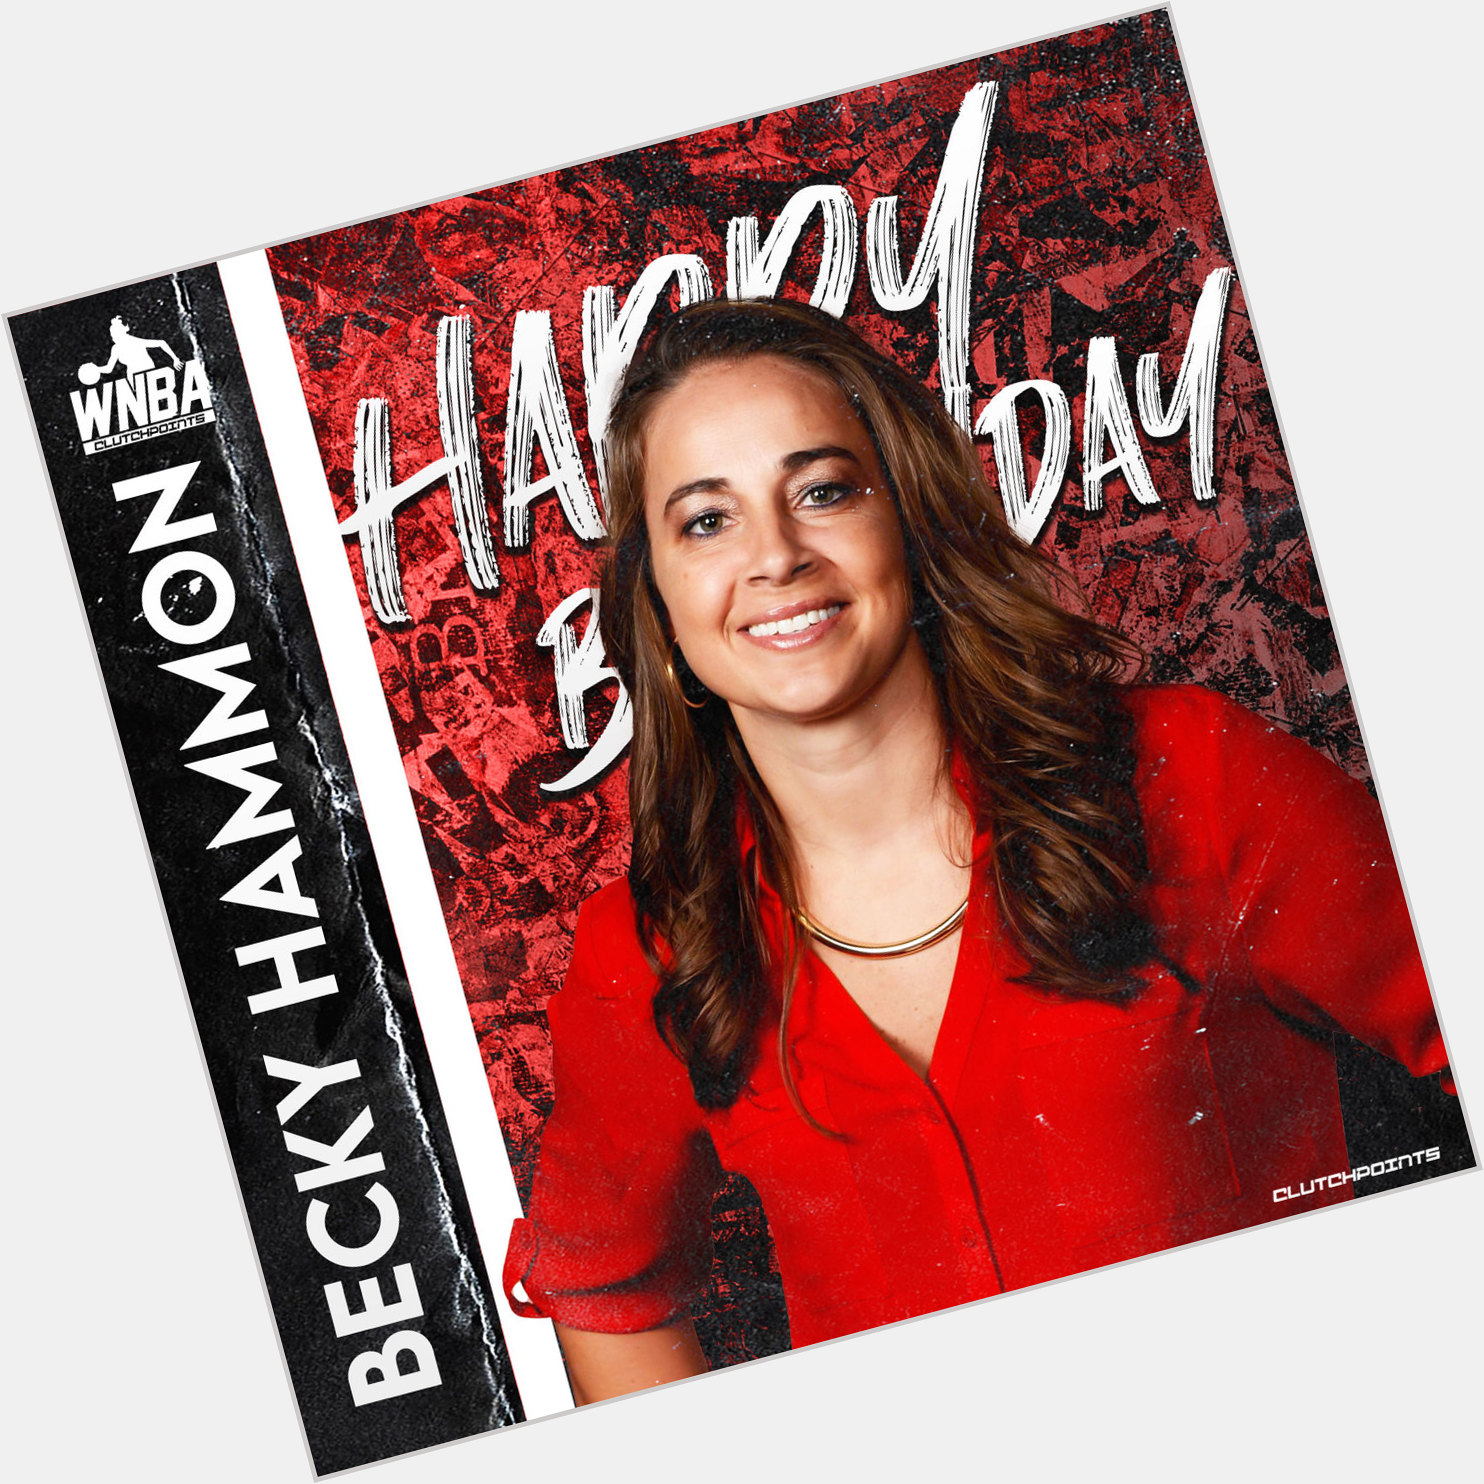 Join us as we greet Becky Hammon of the Las Vegas Aces a happy 45th birthday! 